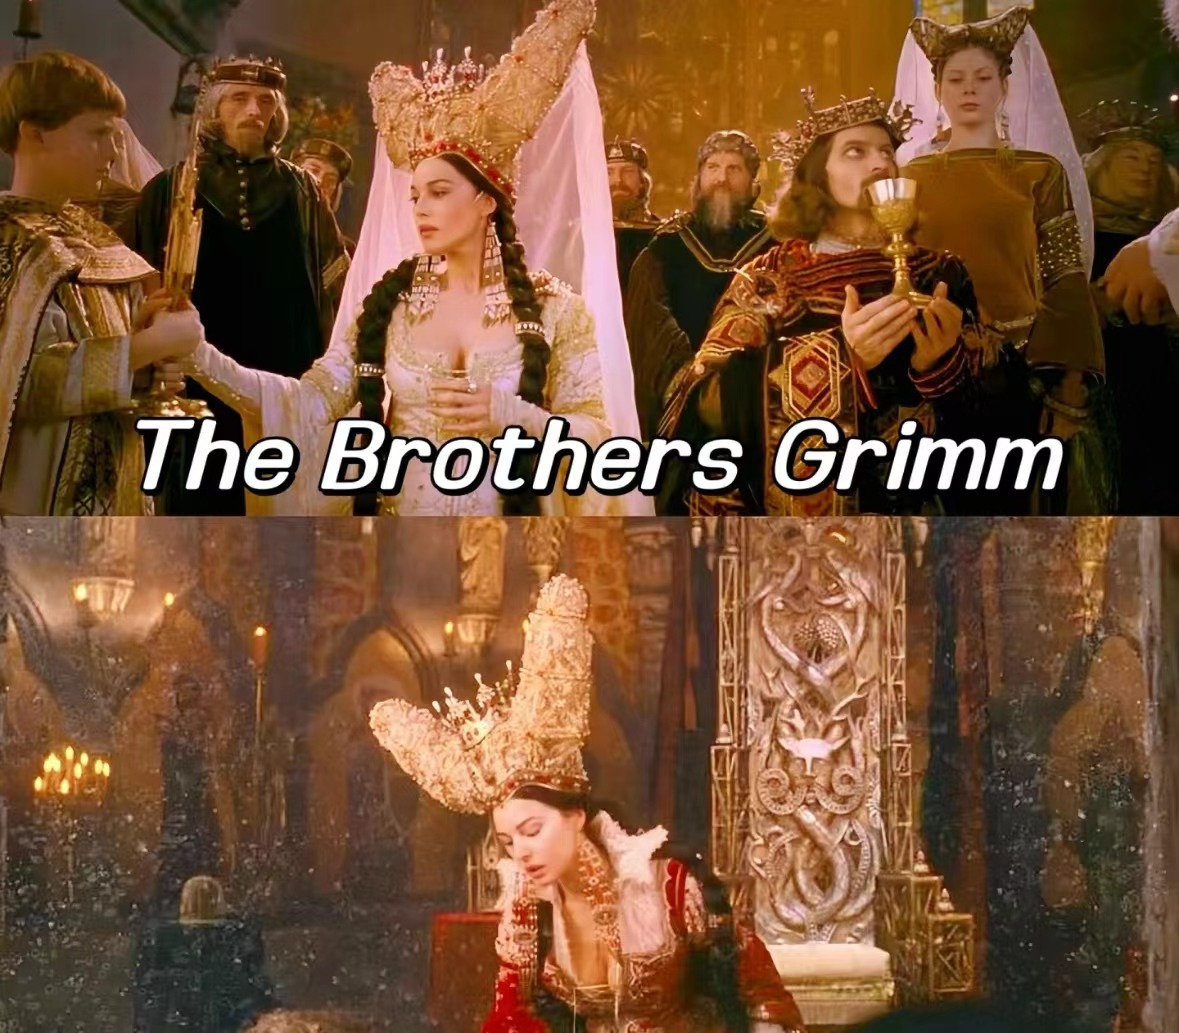 The Brothers Grimm, an alternative fairy tale film full of fantasy, really makes girls’ hearts burst with excitement!#movie #movies